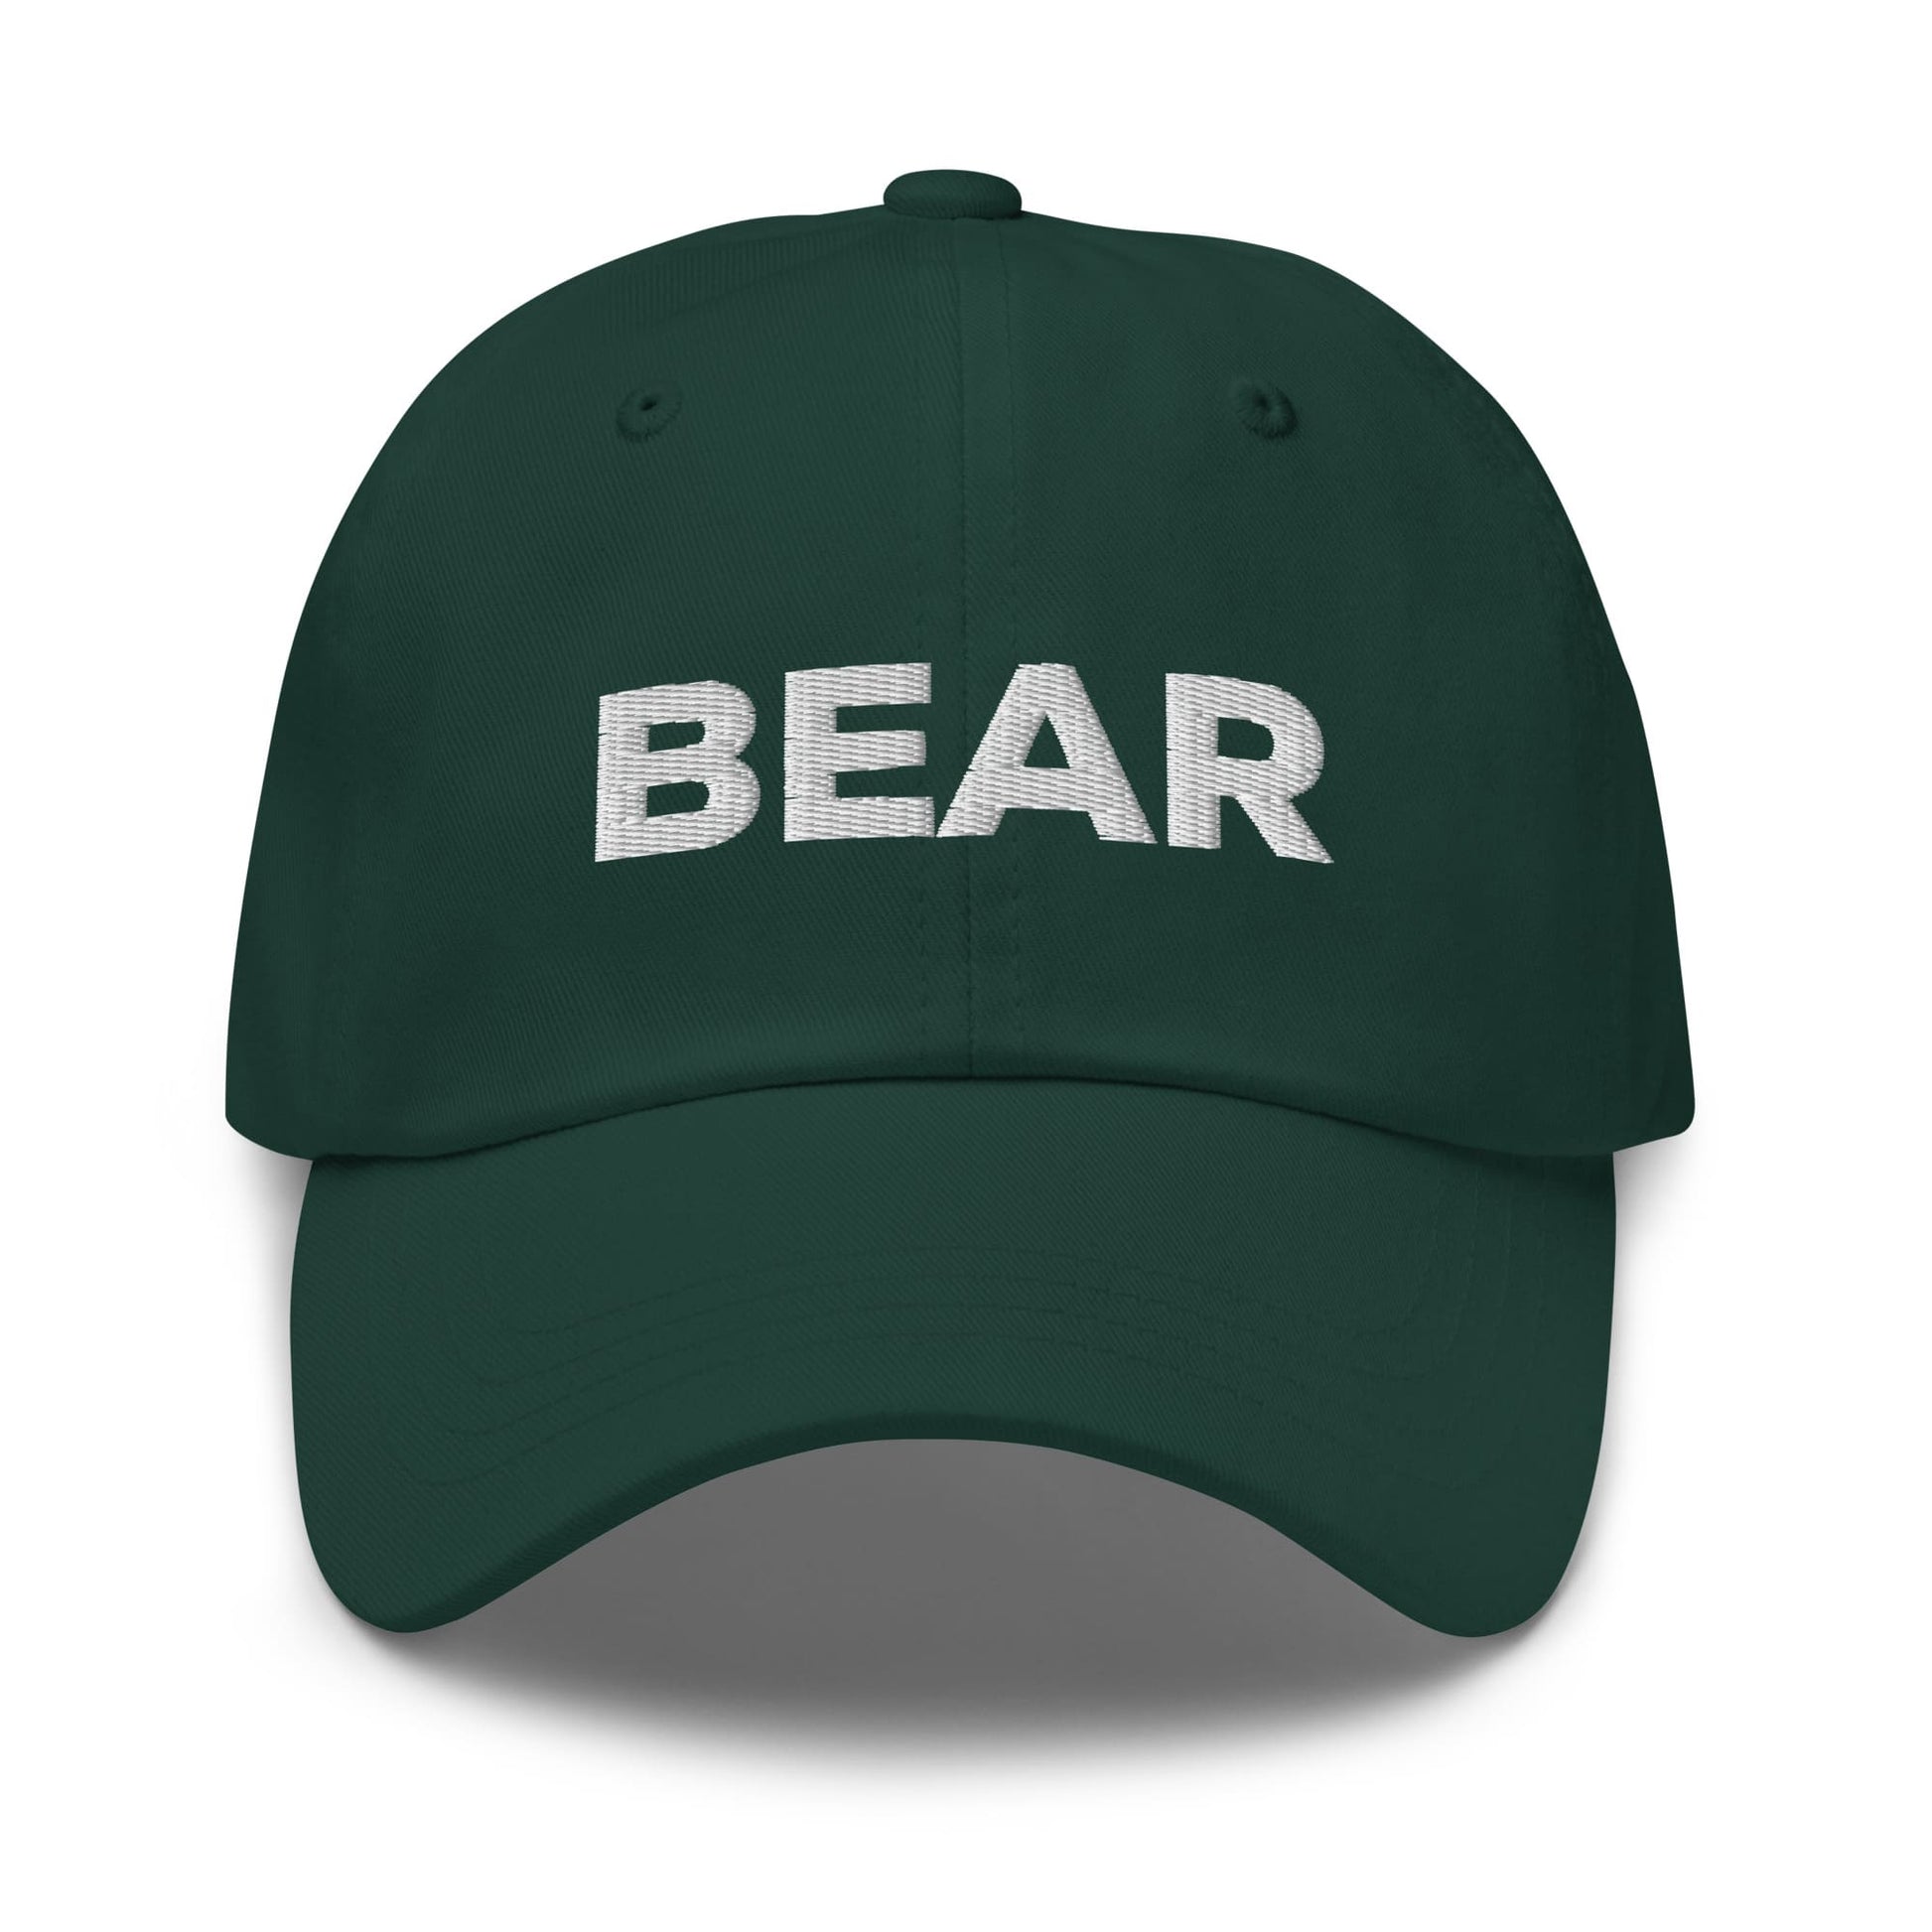 bear pride hat, embroidered gay bear cap, green